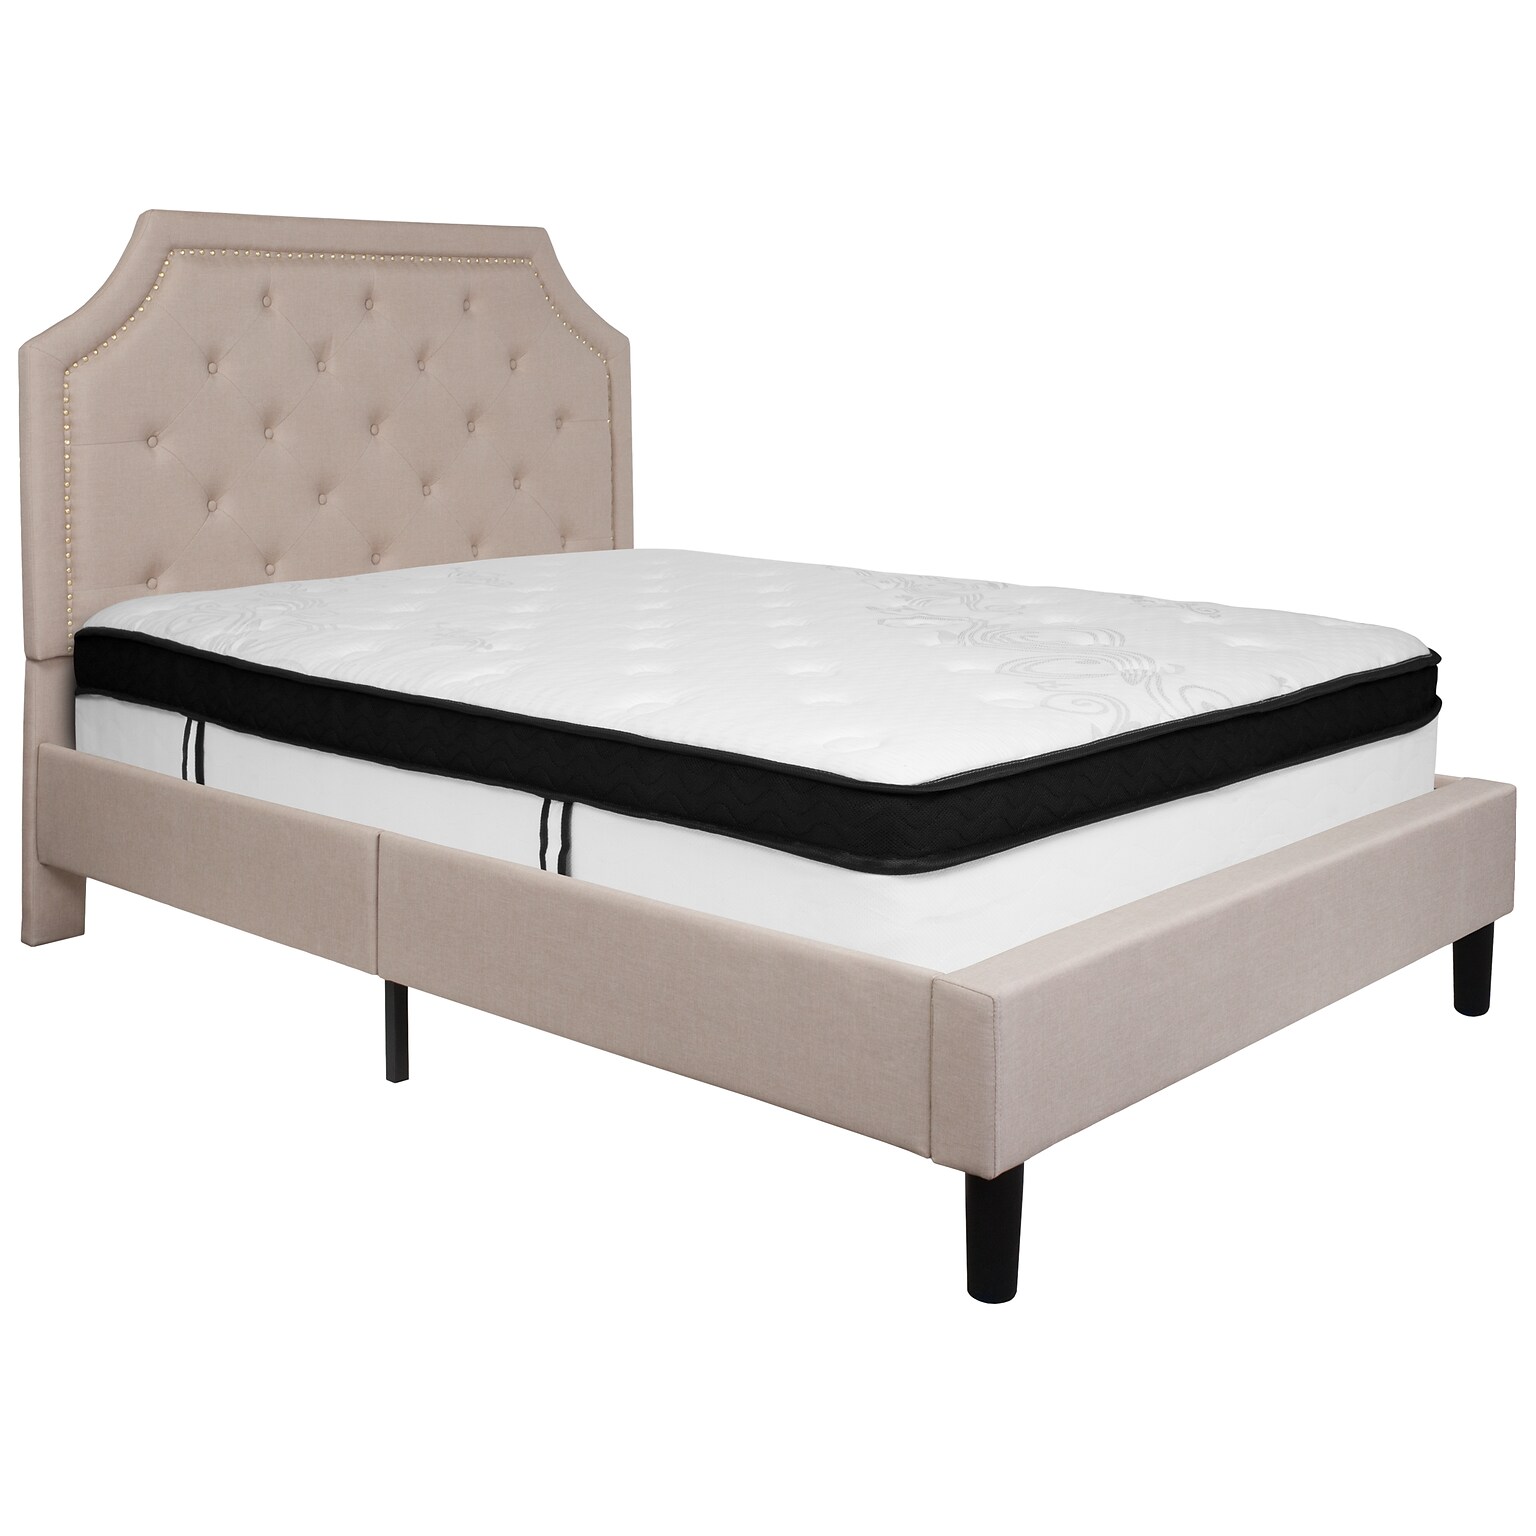 Flash Furniture Brighton Tufted Upholstered Platform Bed in Beige Fabric with Memory Foam Mattress, Full (SLBMF2)